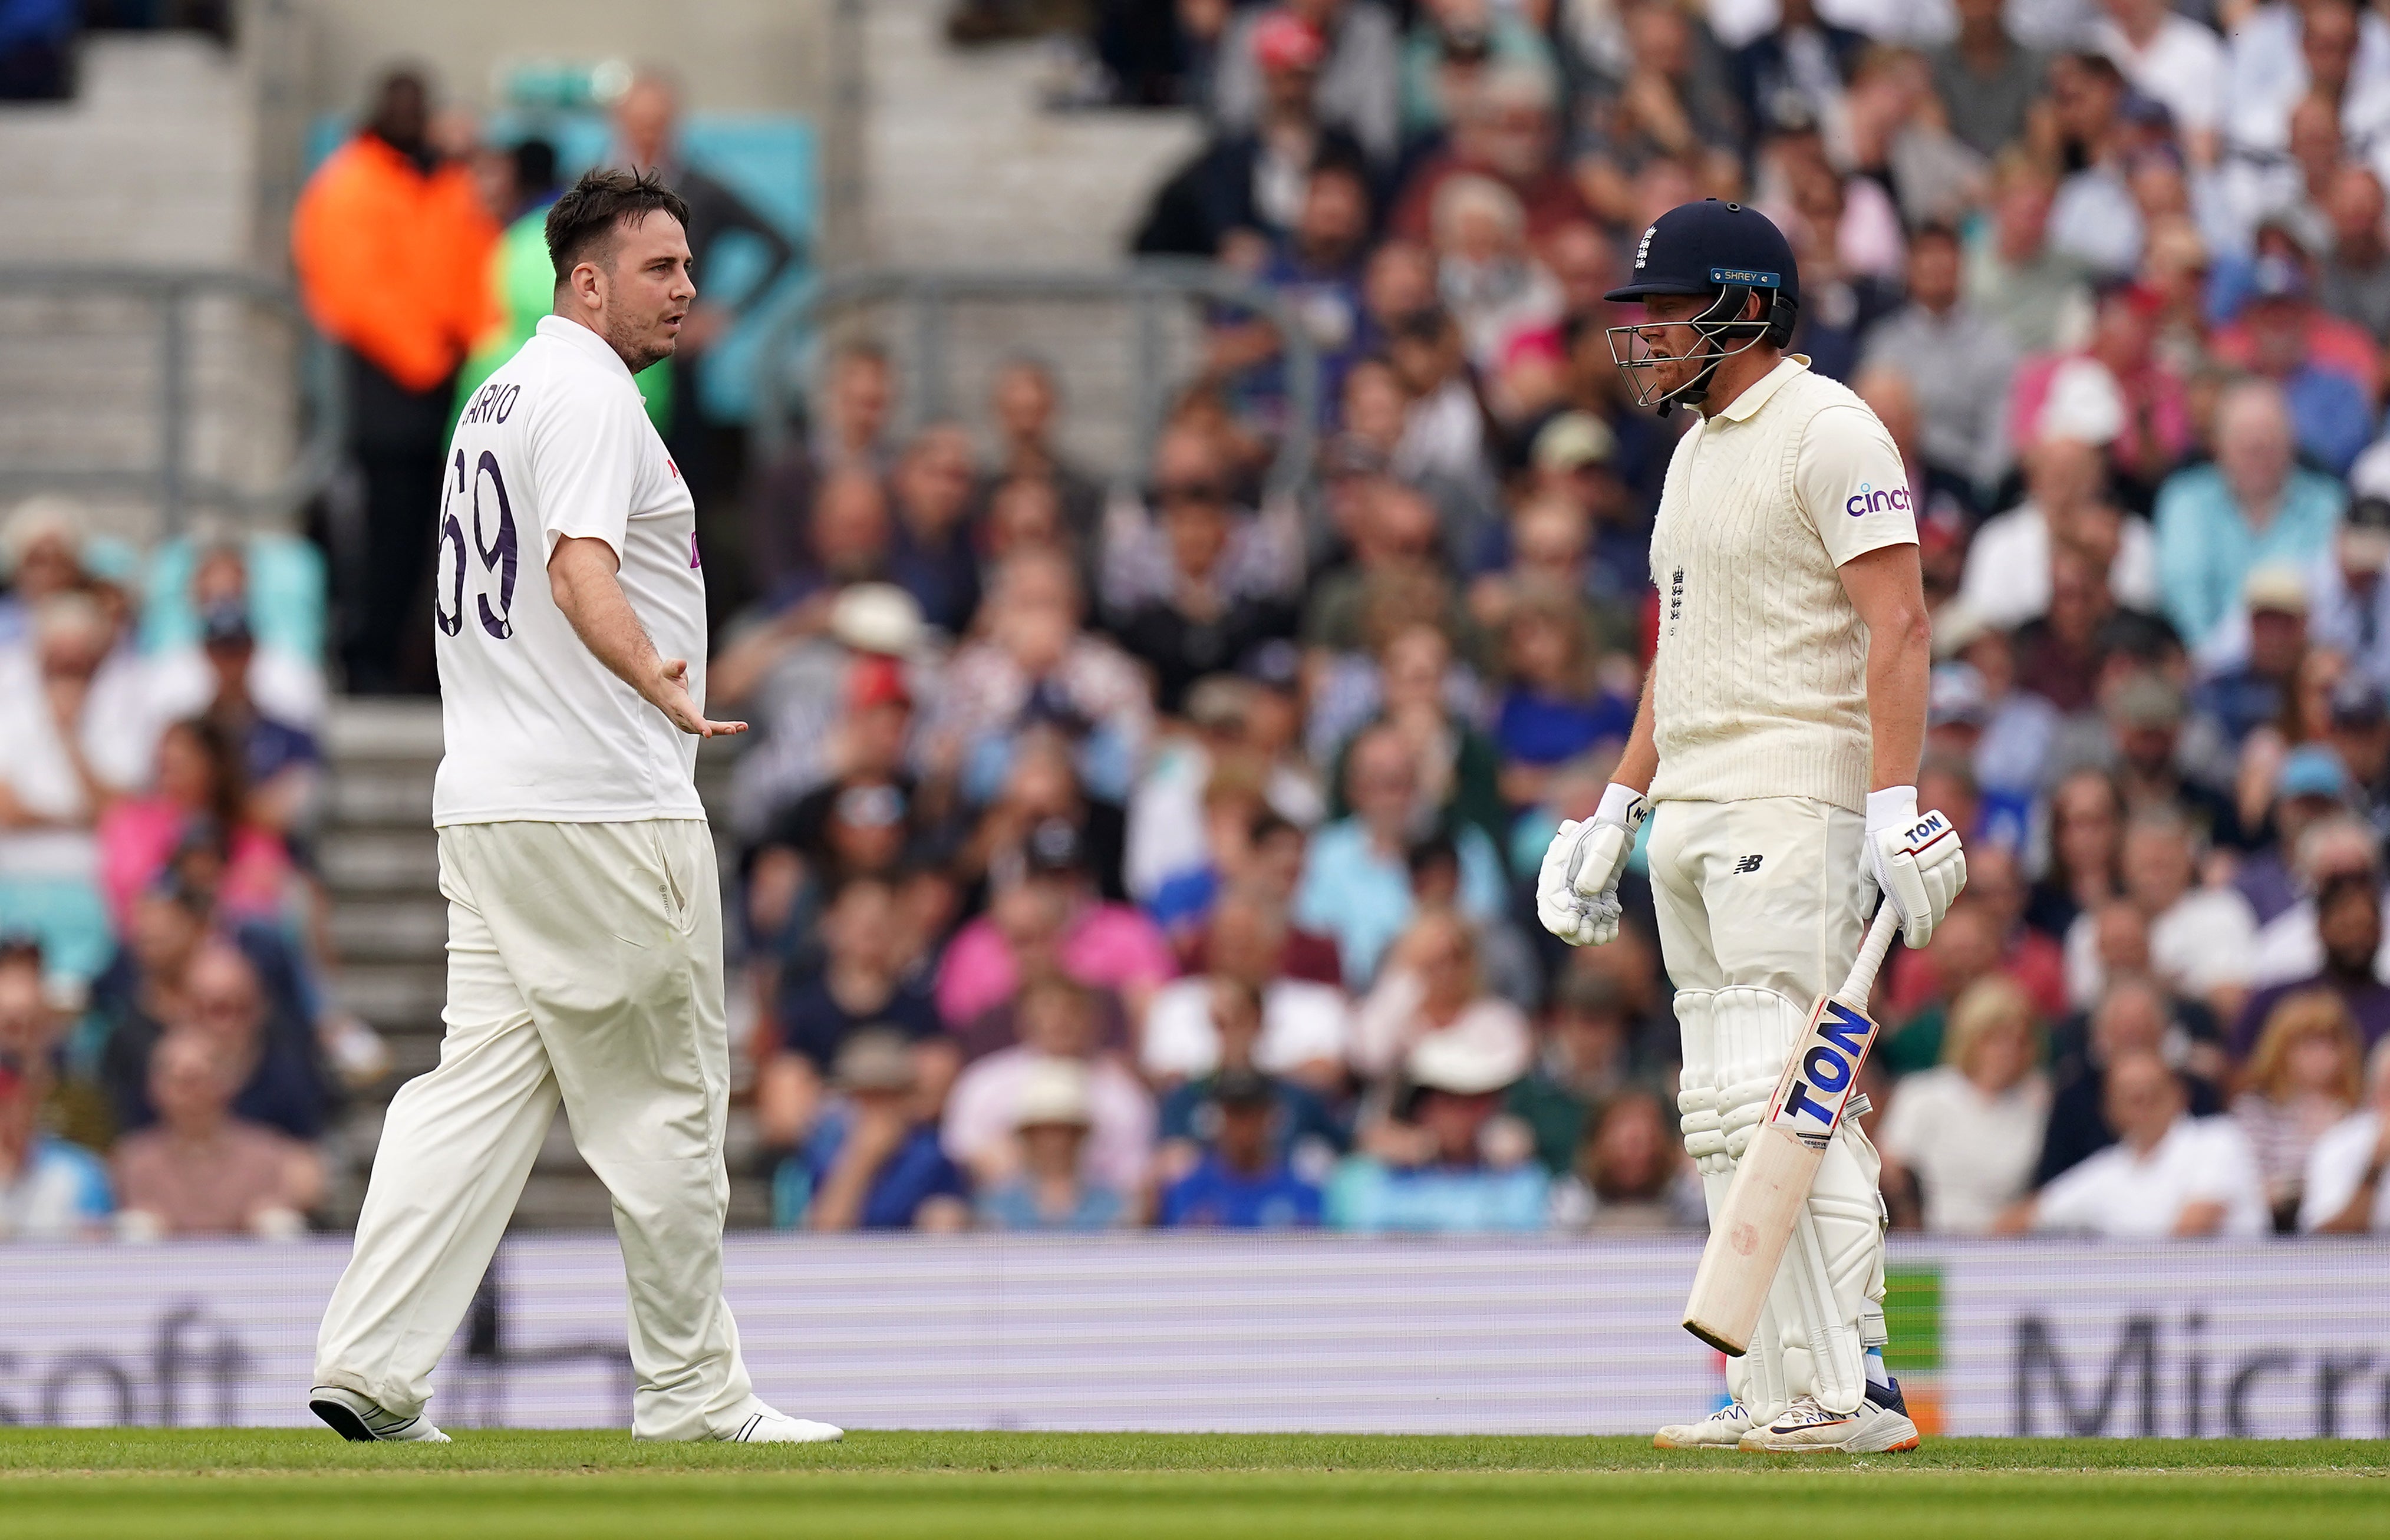 Jarvis on the pitch with England’s Jonny Bairstow (Adam Davy/PA)